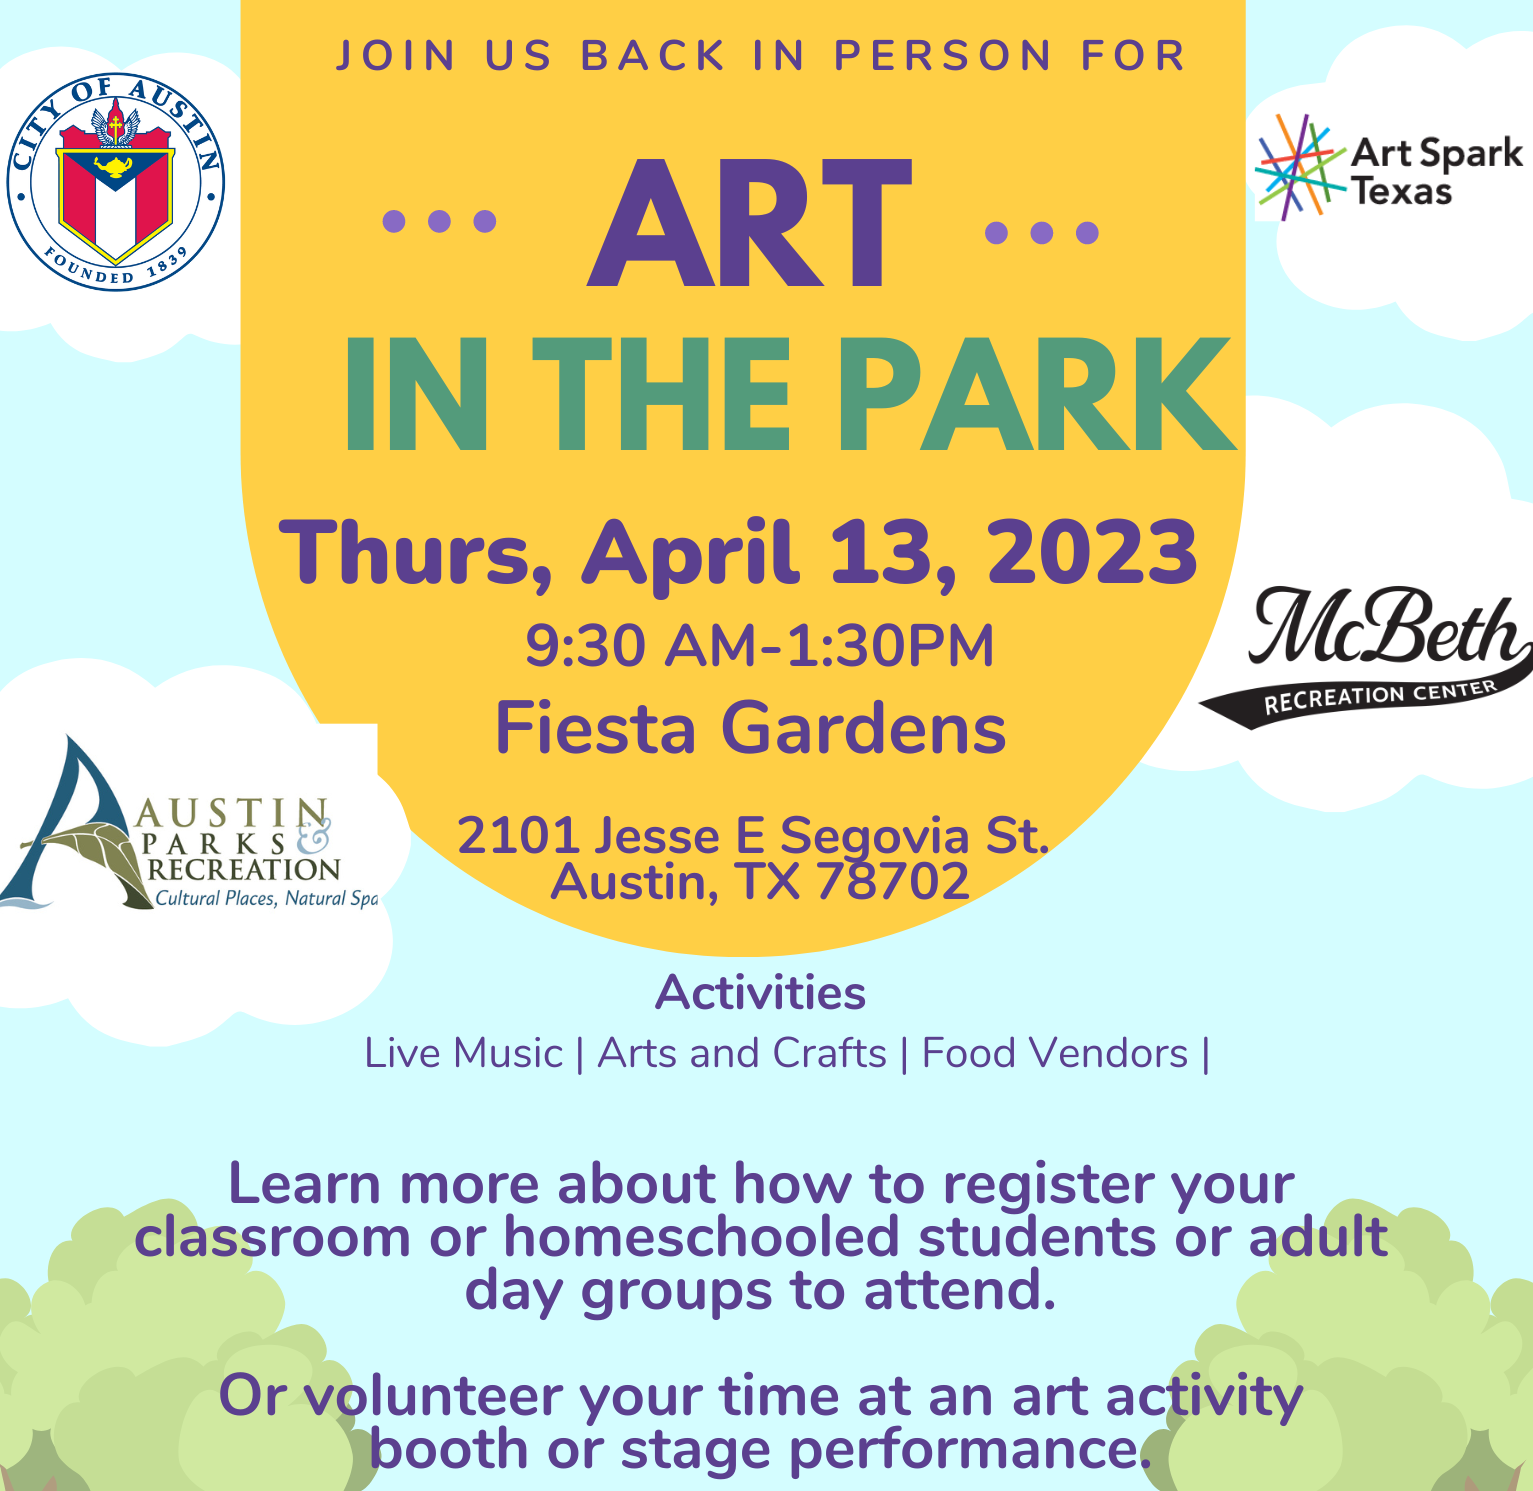 cartoon style landscape with two trees on a hill and clouds in a blue sky. Text reads, "Art in the Park, Thursday April 13, 2023."